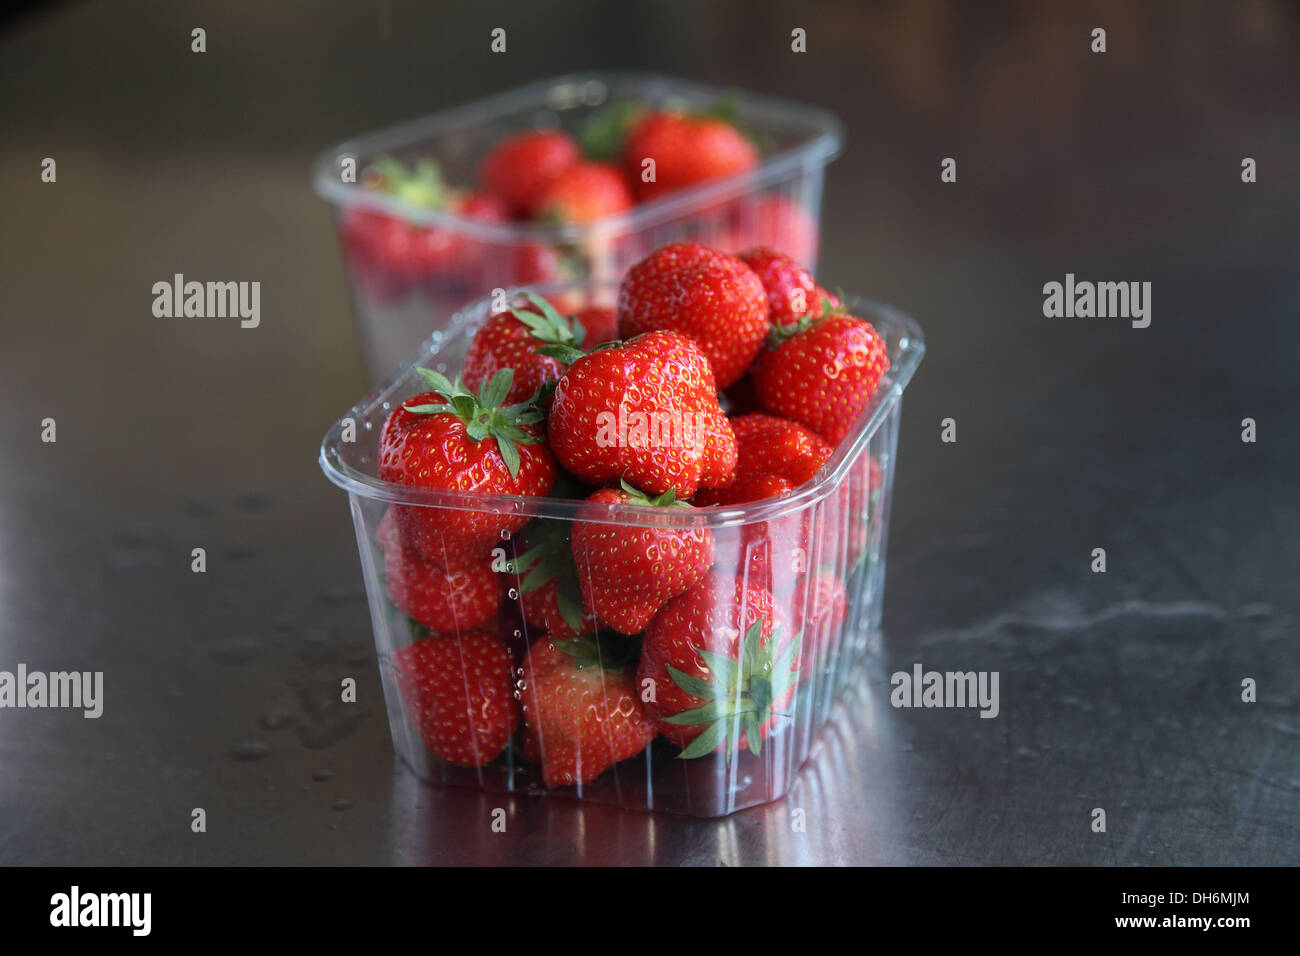 A selection of juicy sweet strawberries Stock Photo